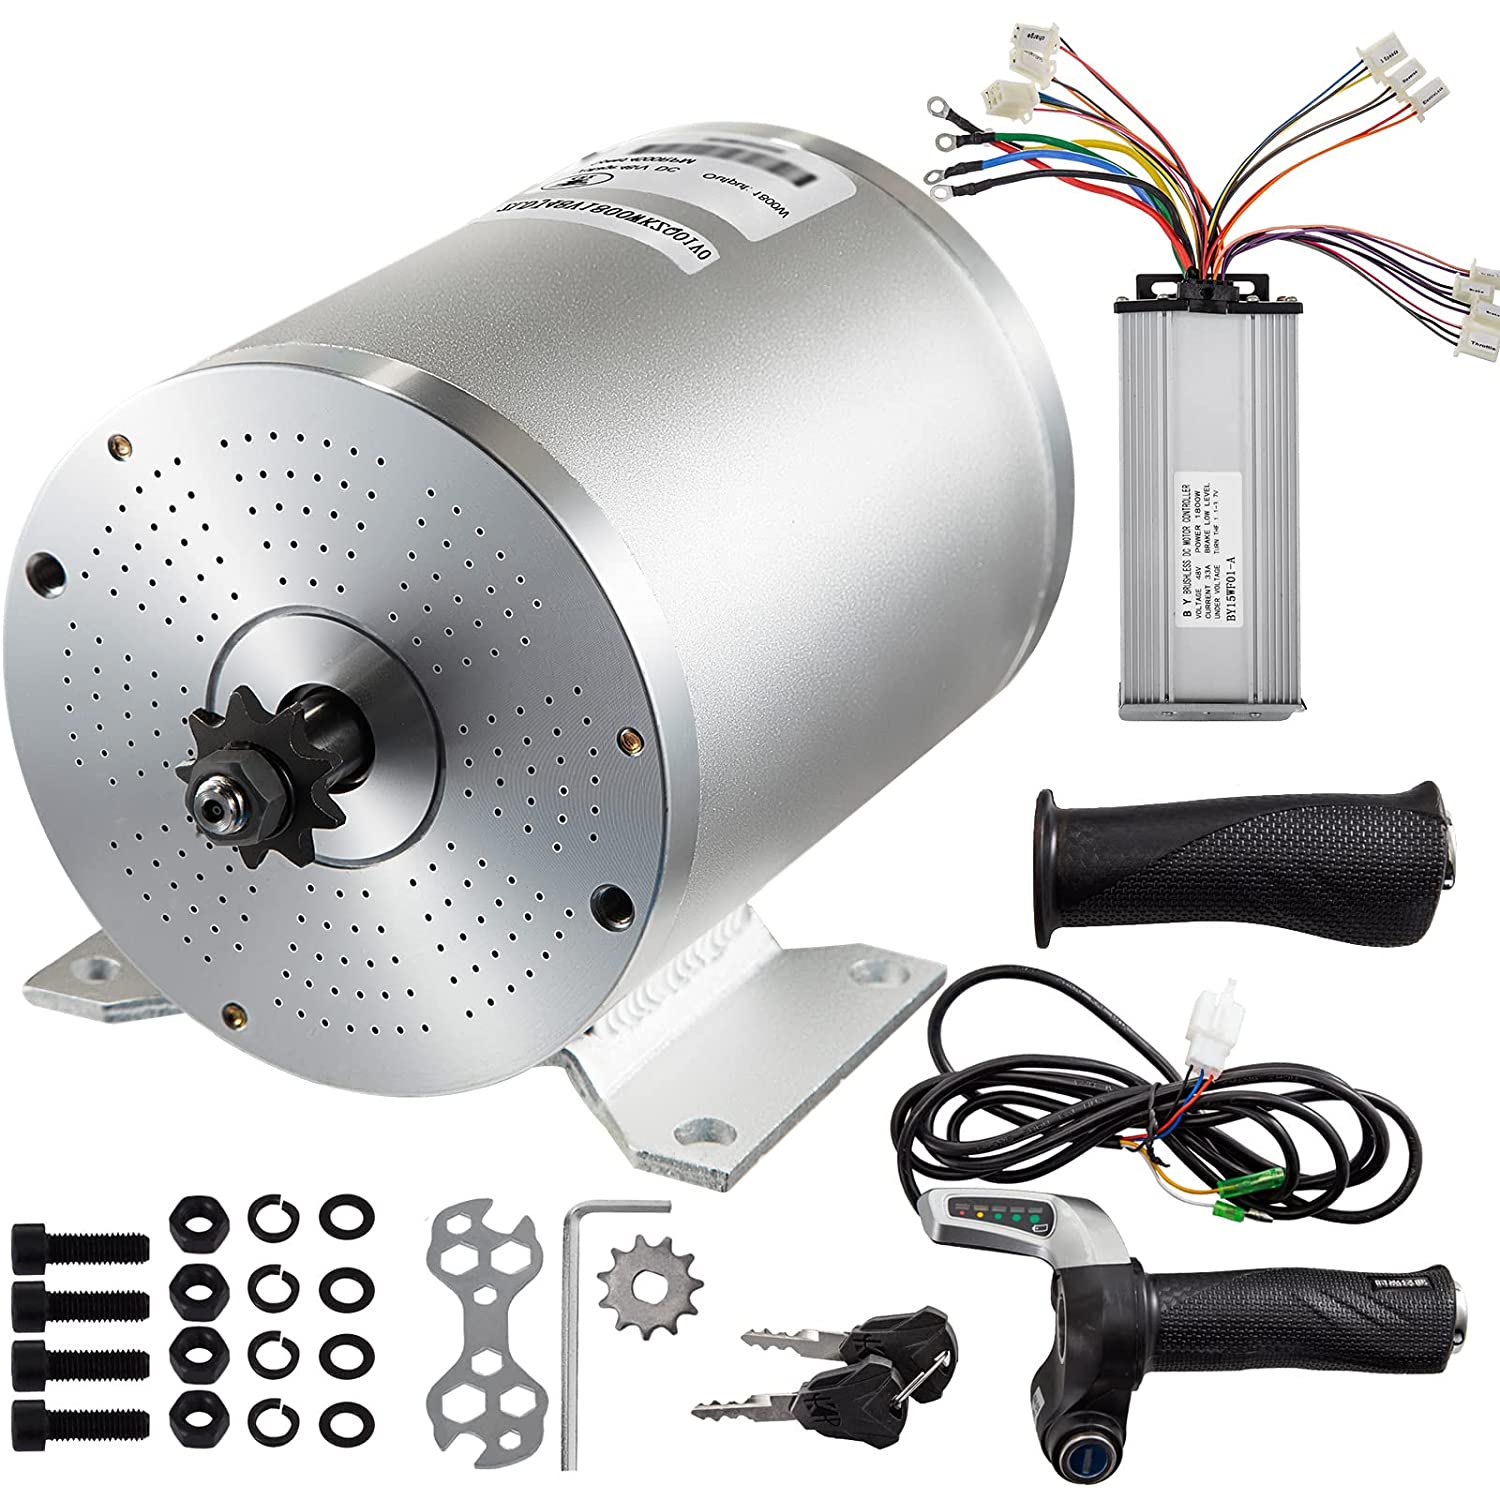 BestEquip Electric DC Motor, 2KW 48V Brushless Motor Kit 4300rpm High Speed Electric Scooter Motor for Go Kart Bike Motorcycle with Speed Controller